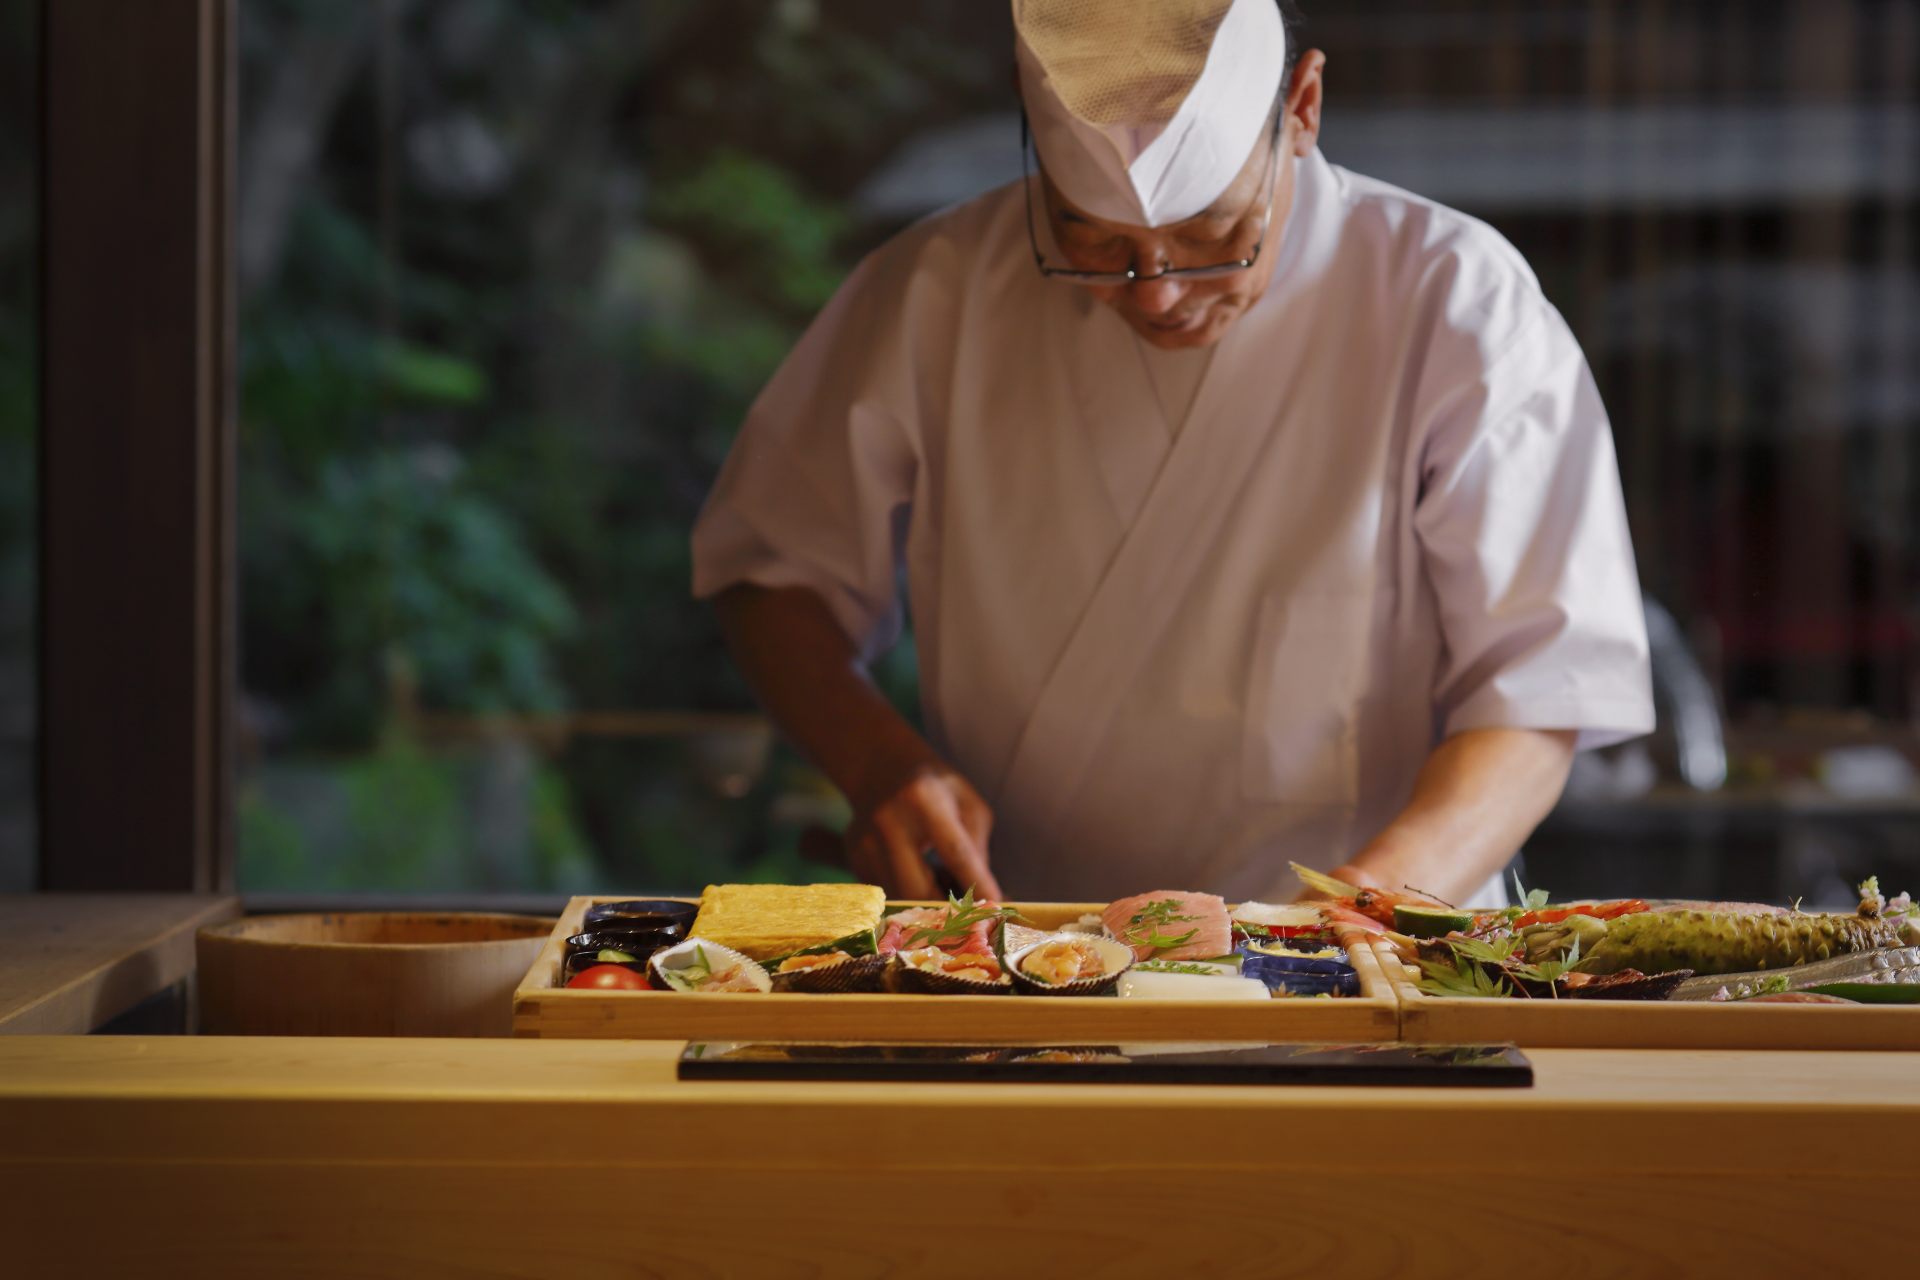 For dinner, partake in the finest sushi, where a skilled chef wields their skills right in front of your eyes.